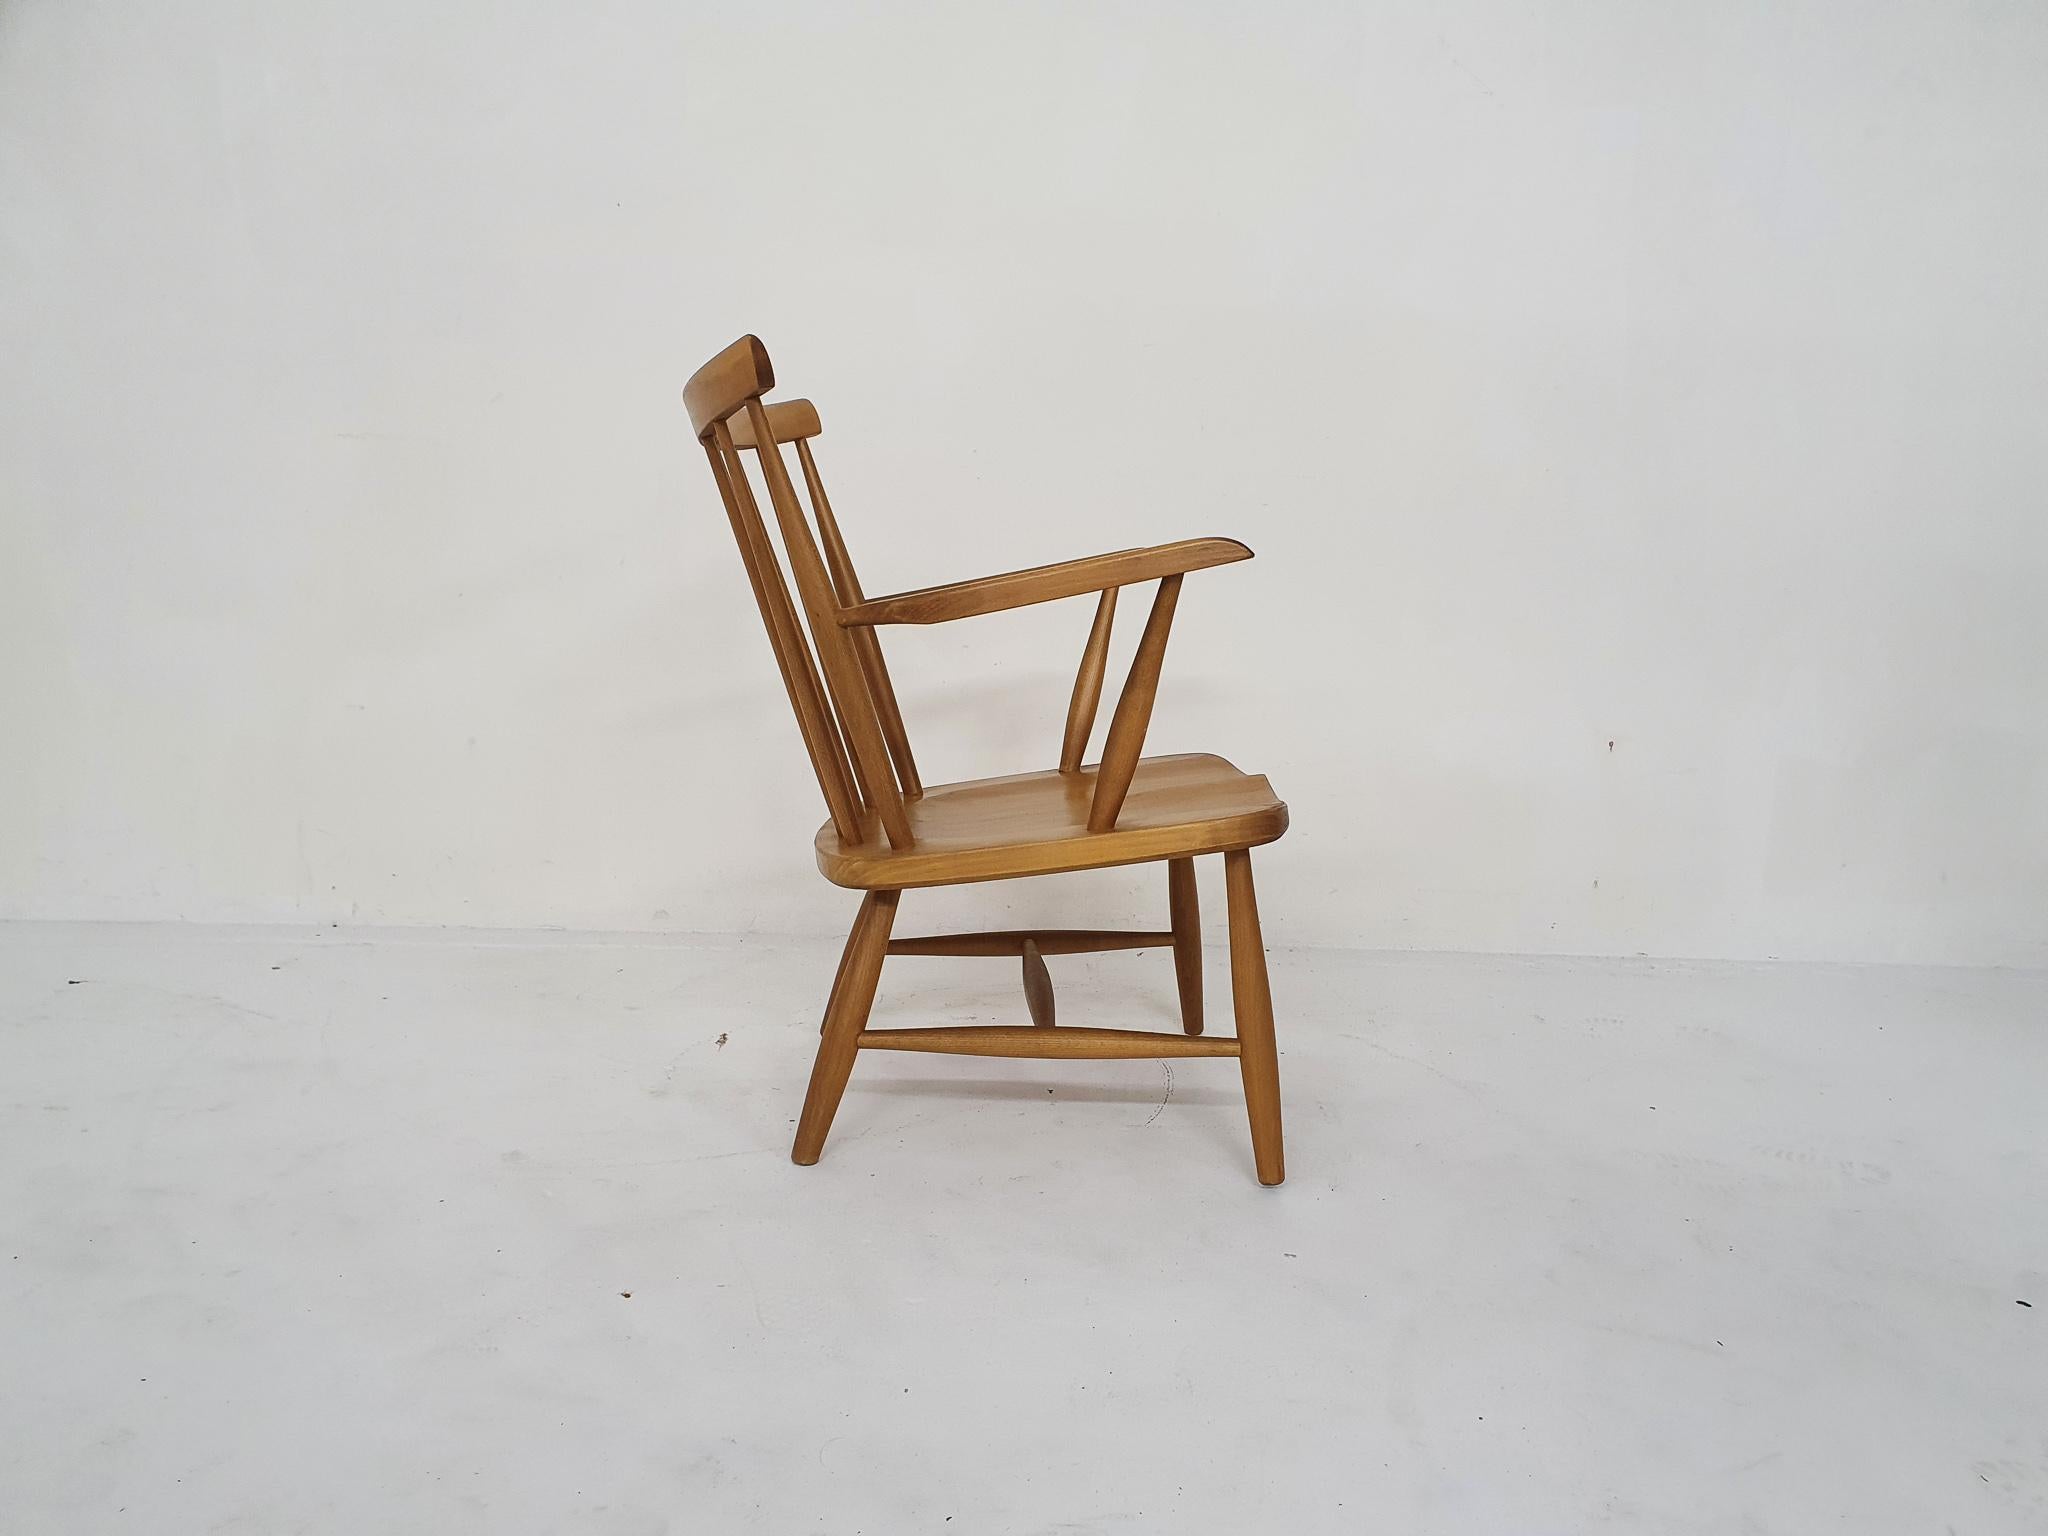 spindle arm chair